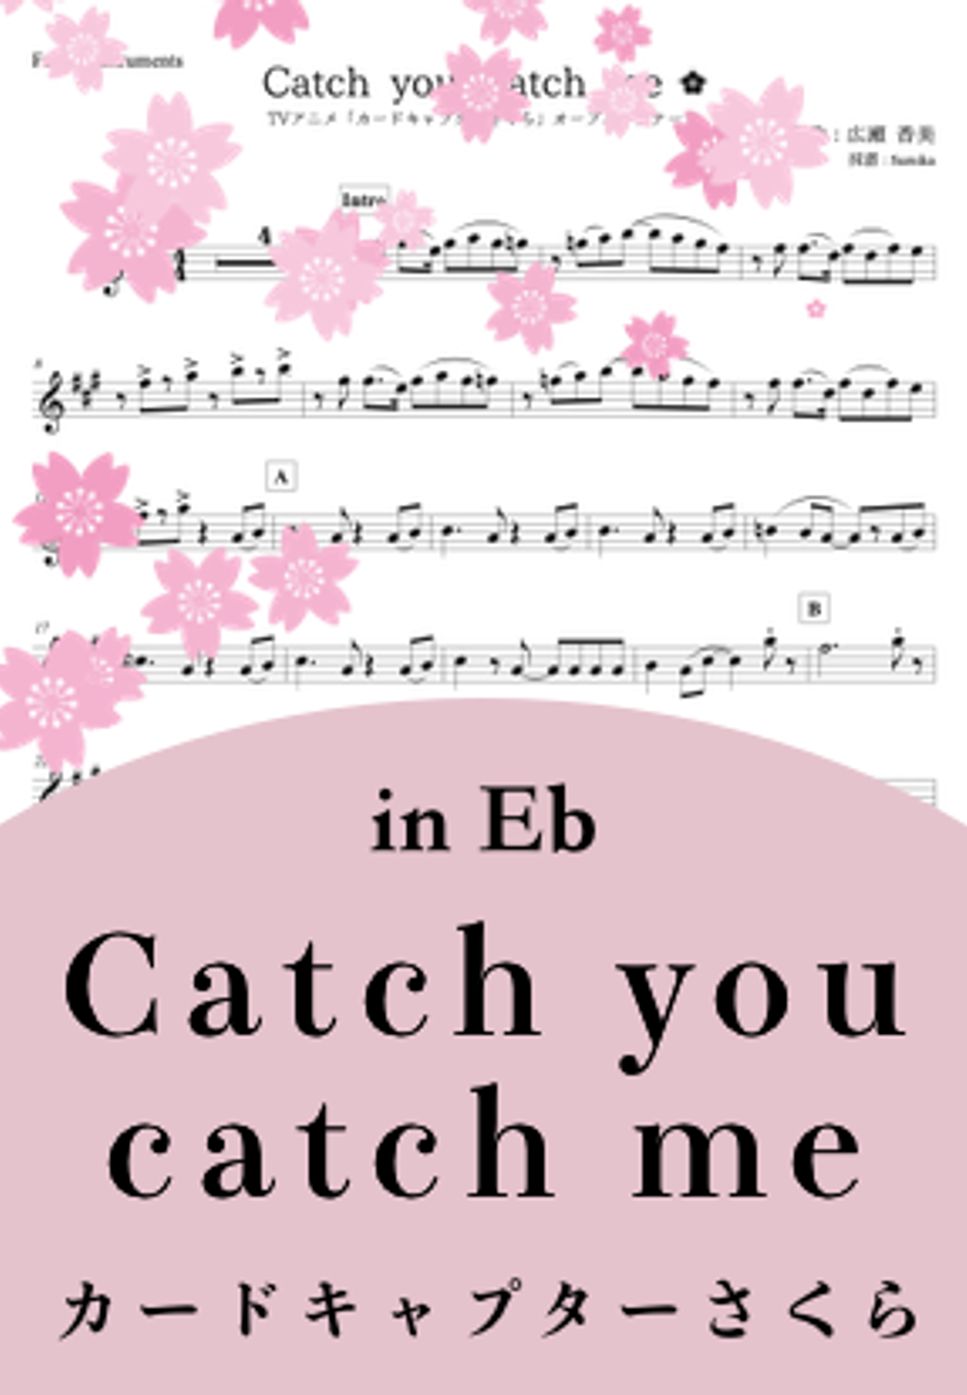 CCさくら - Catch you catch me (in Eb) by Sumika